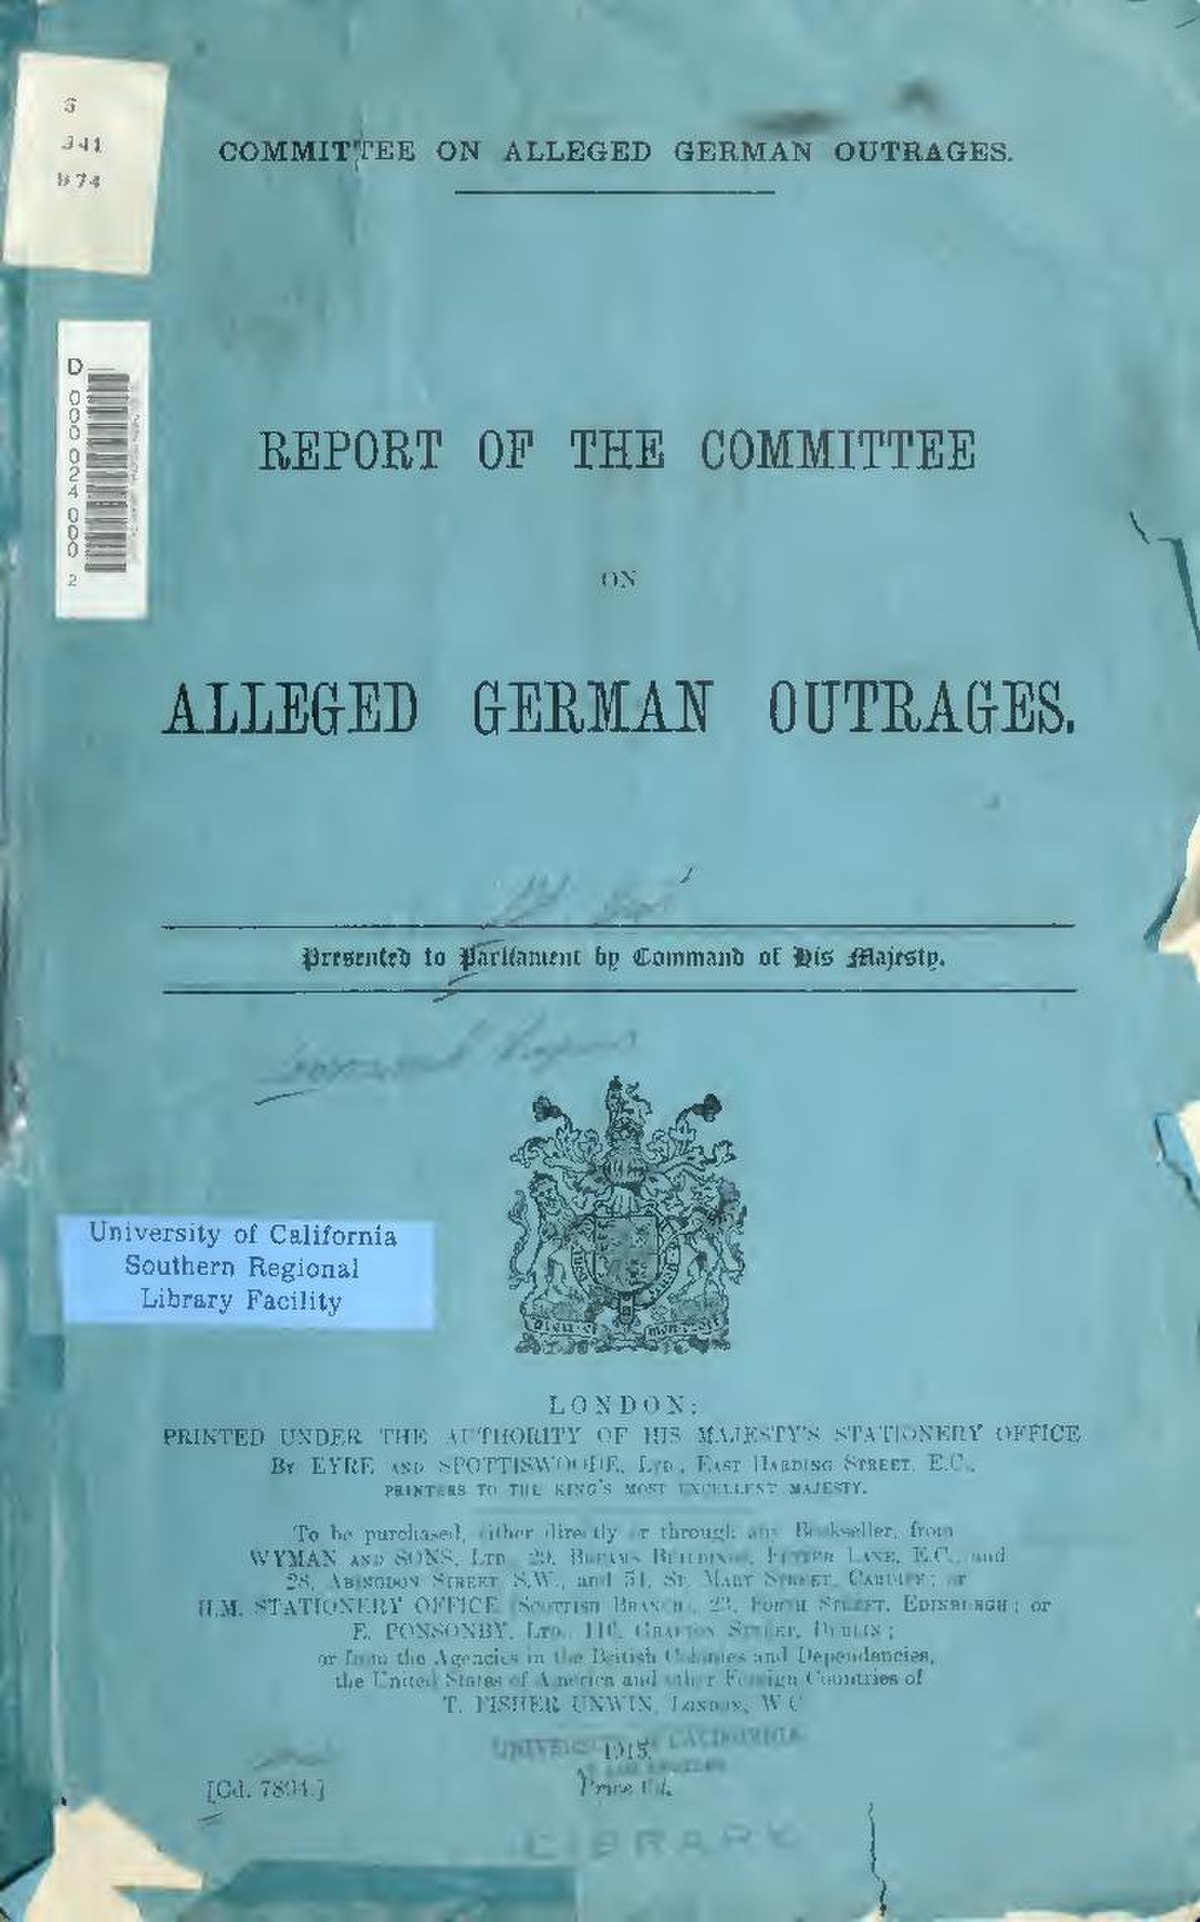 Committee on Alleged German Outrages - Wikipedia